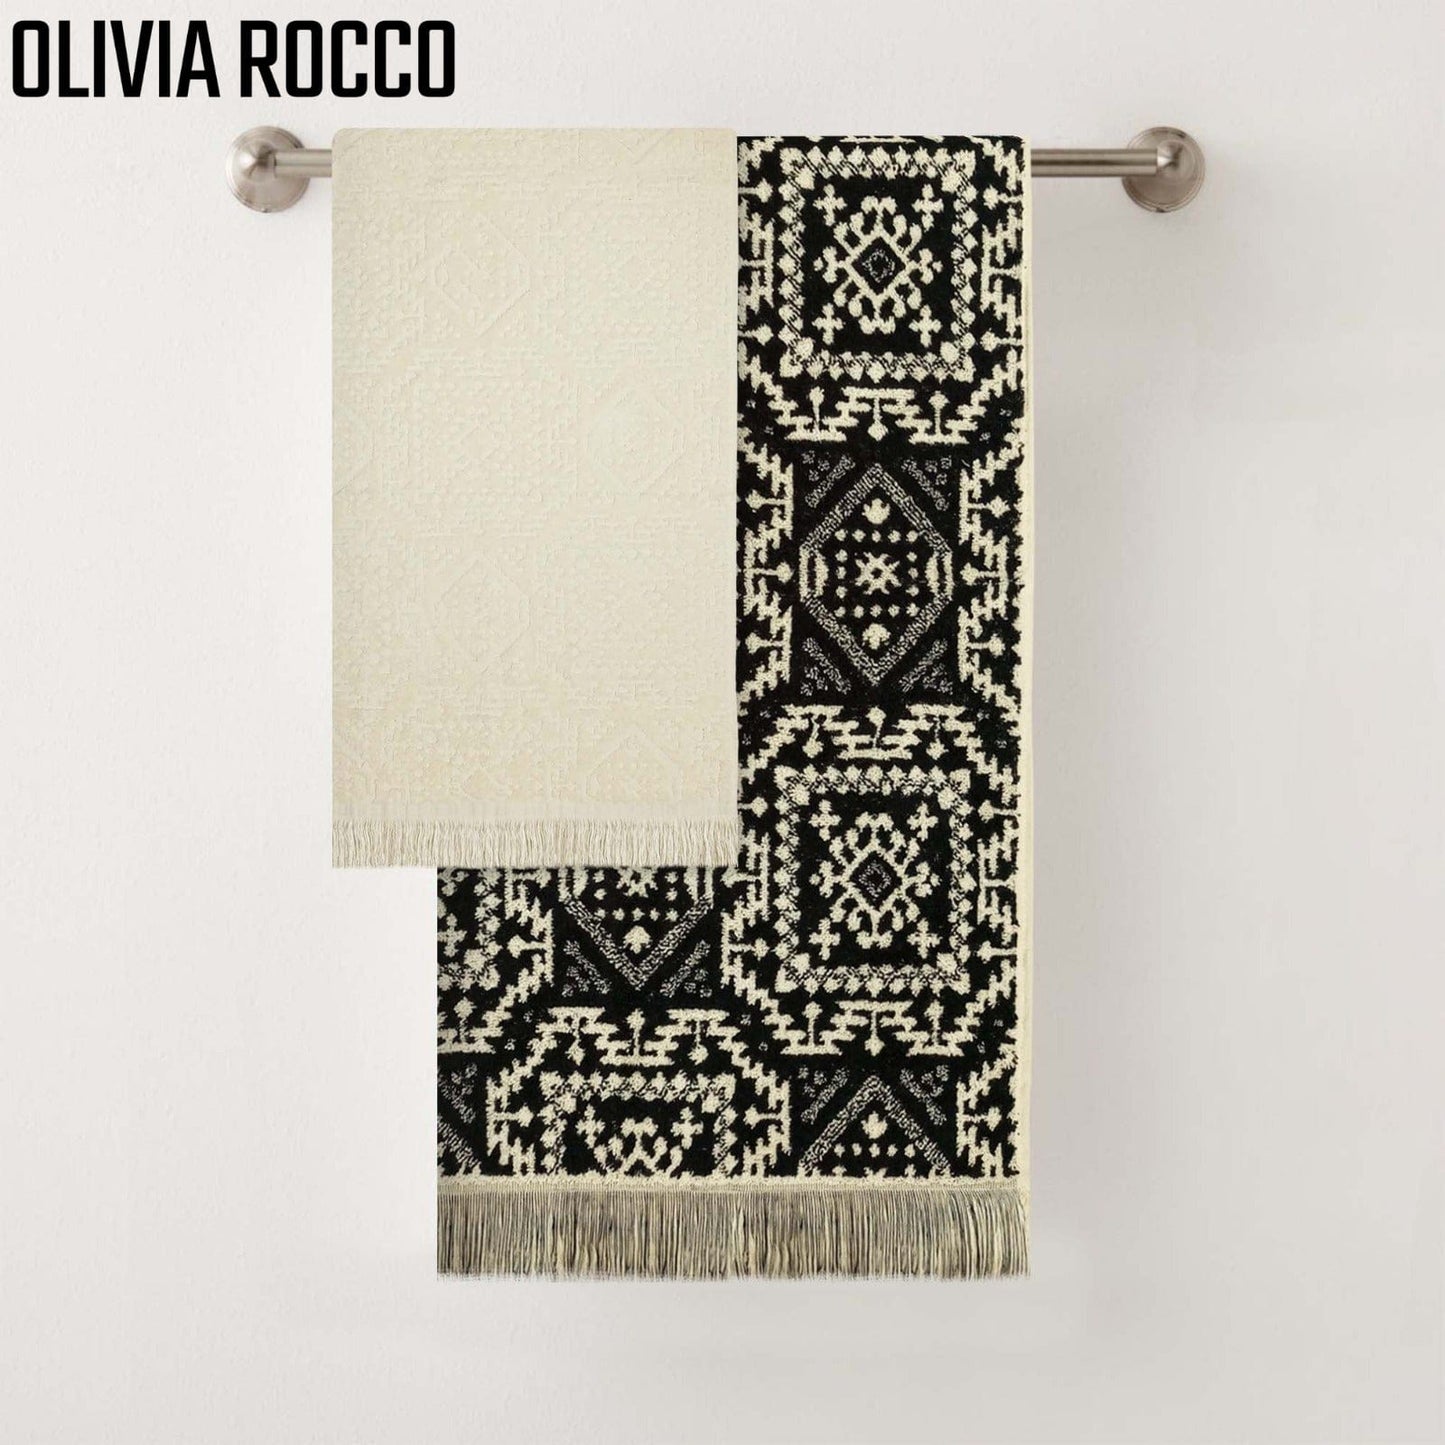 Moroccan Towels Jacquard Towel 40L x 70W  CM / CHECK EMBROIDERED OLIVIA ROCCO Towel